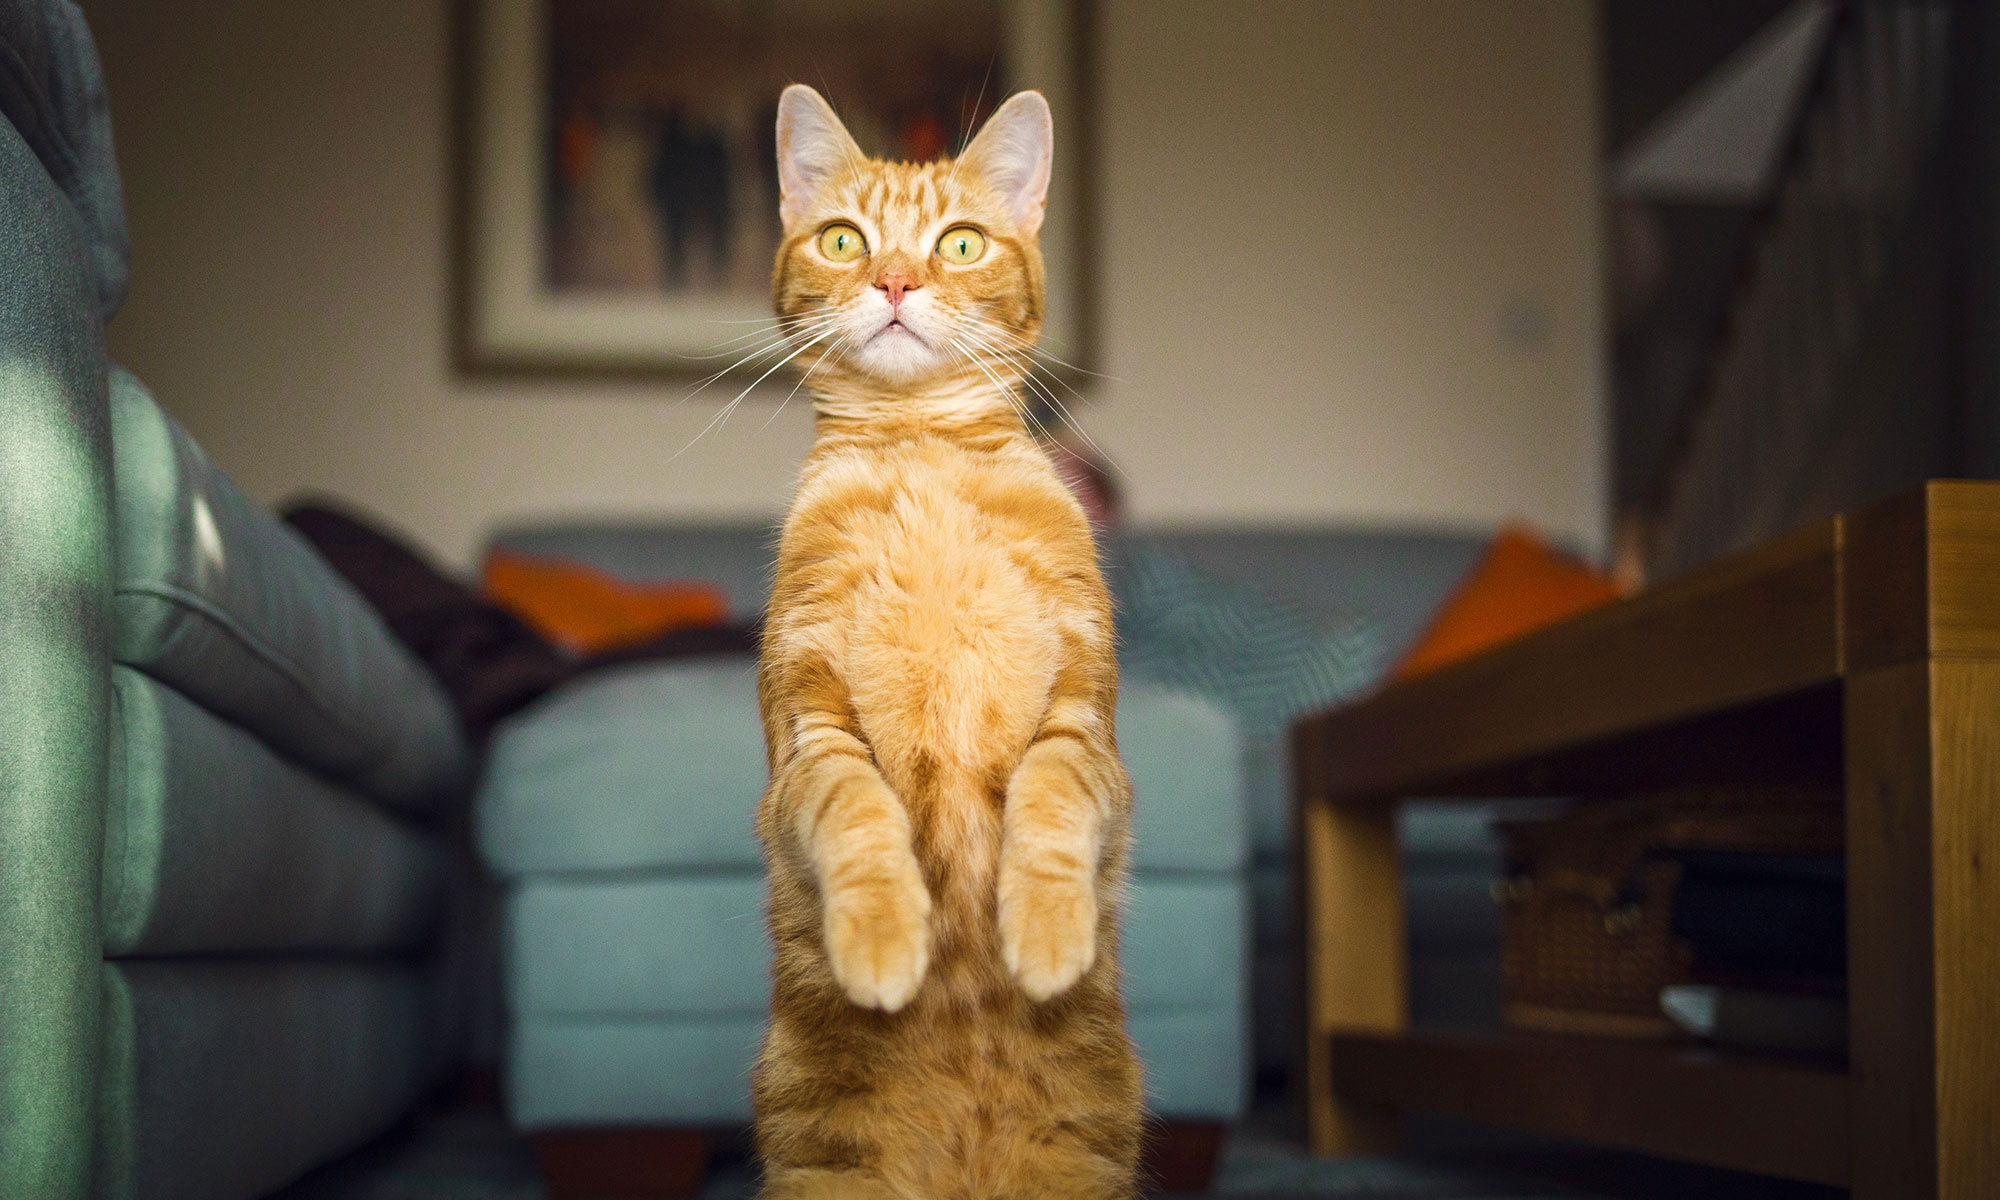 Ginger cat sitting up with paws raised in the living room